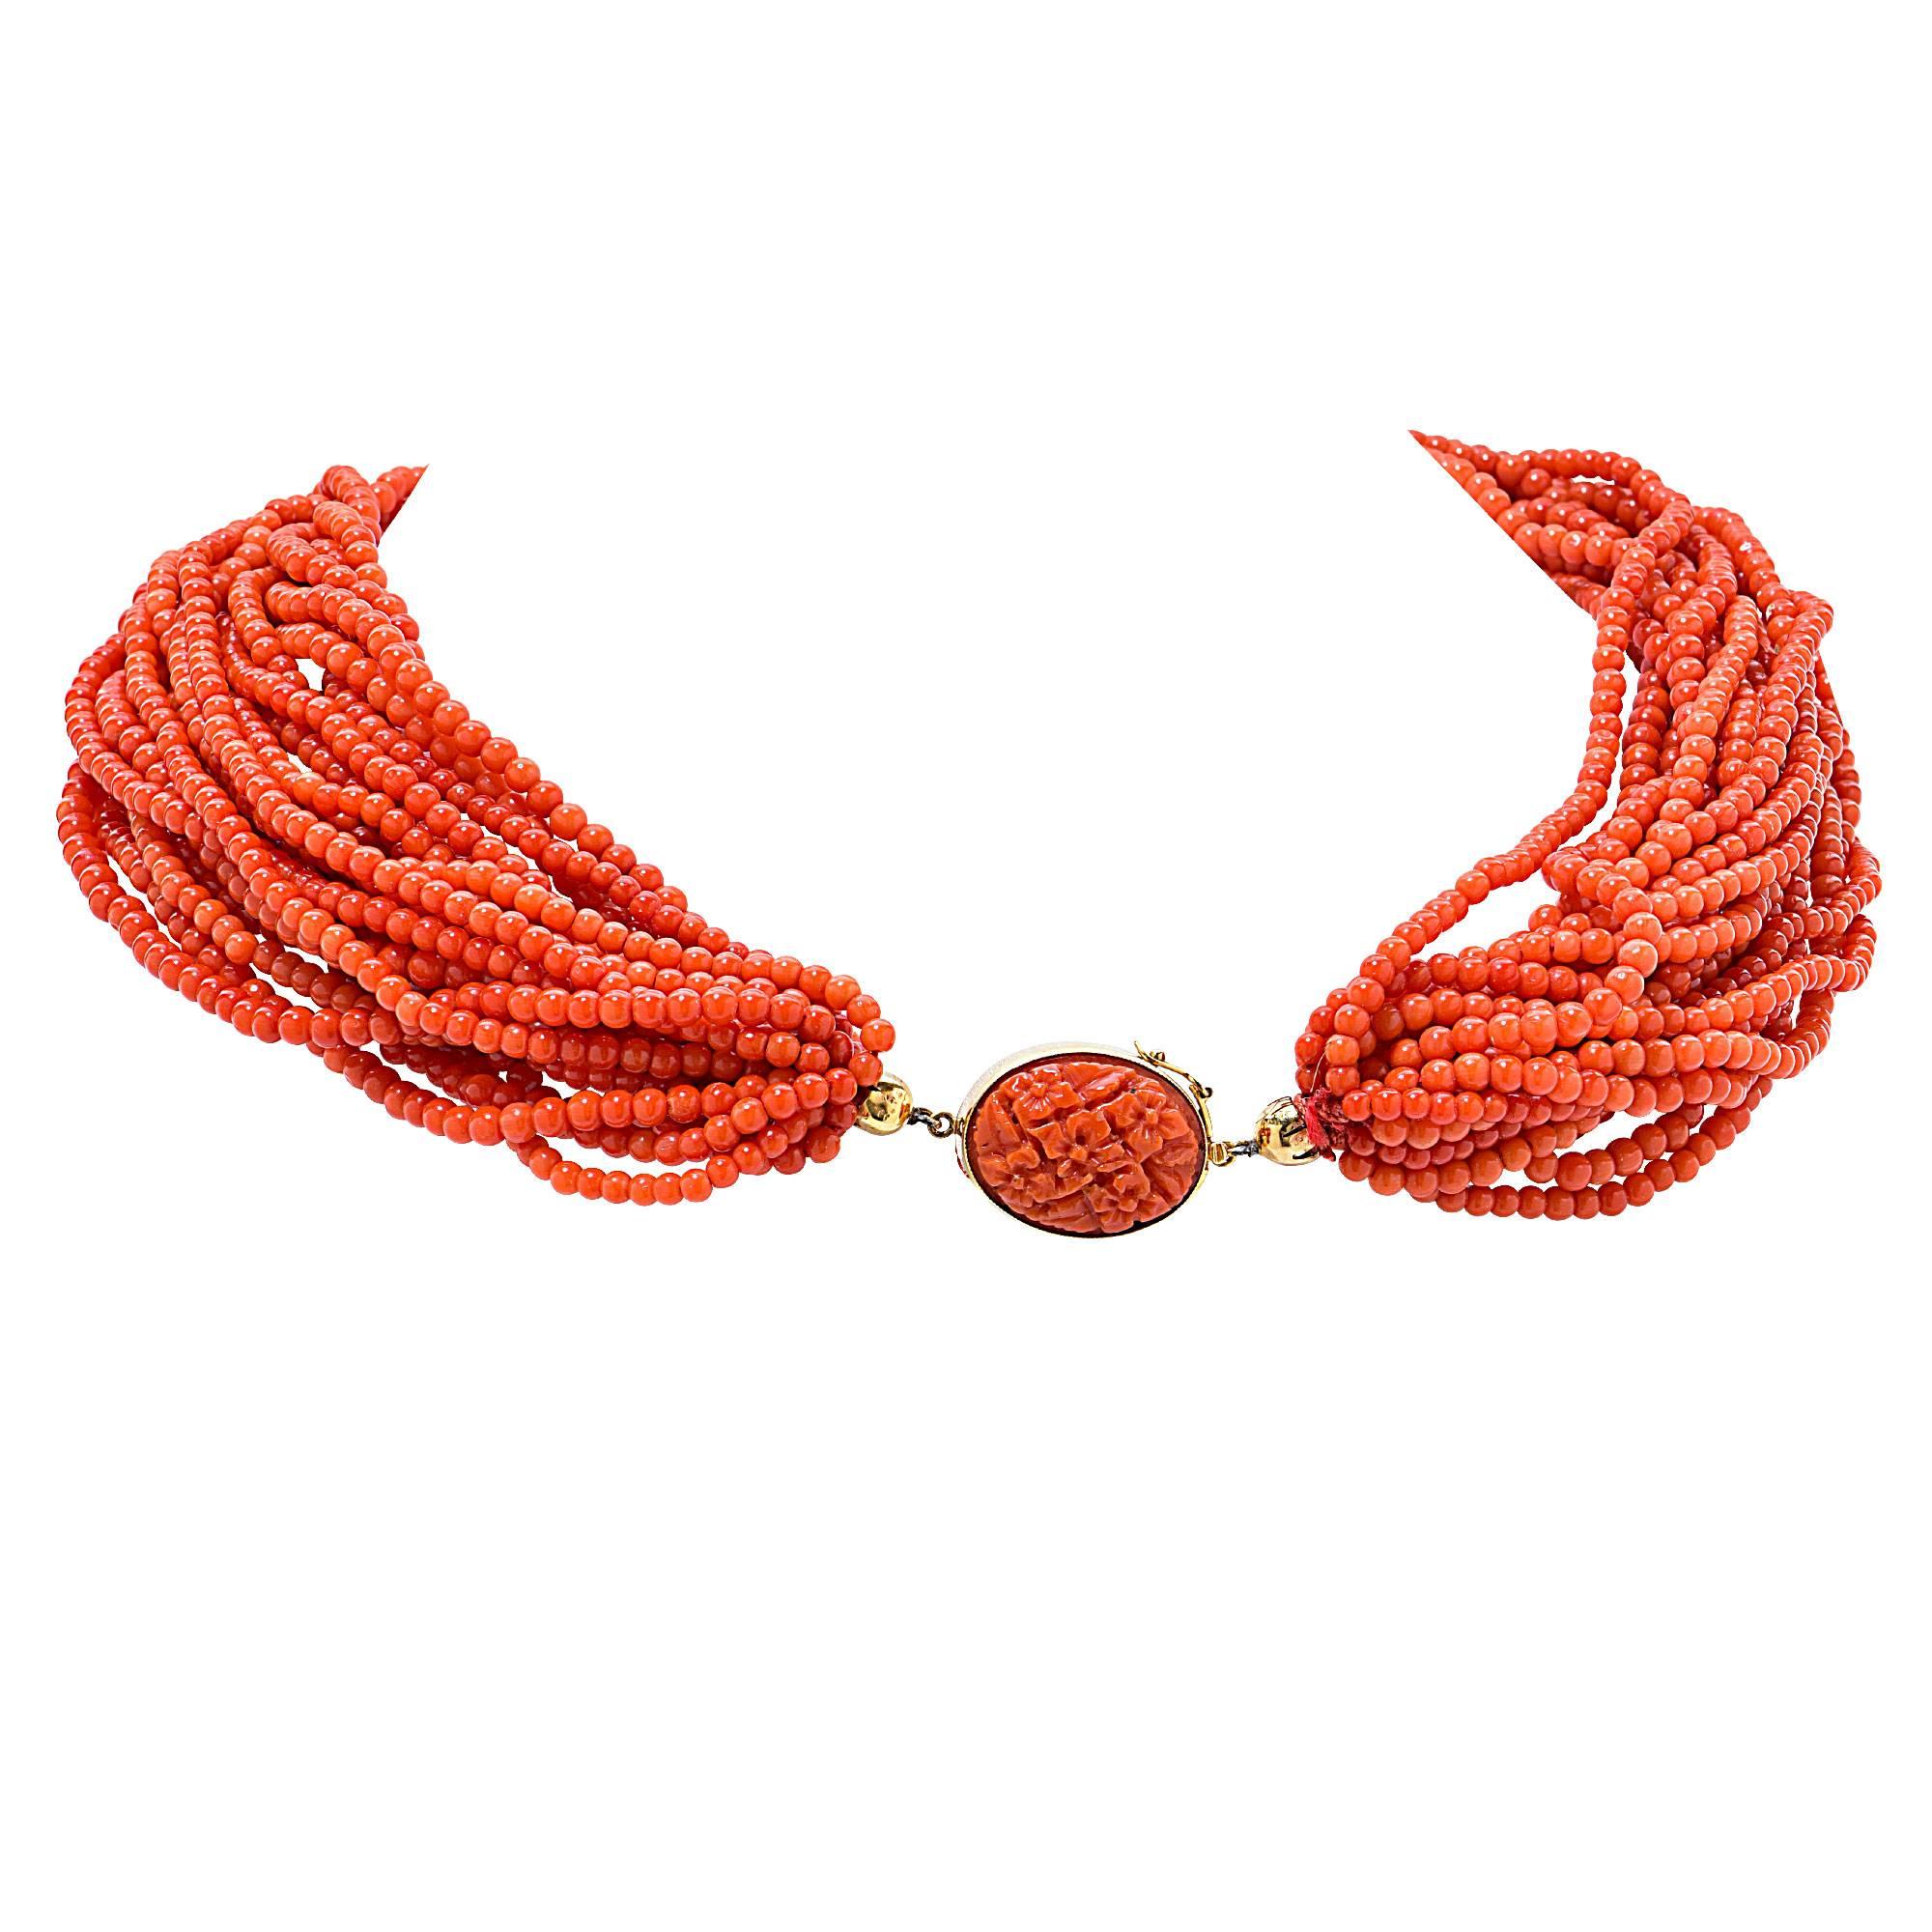 22 strand coral necklace, average 3mm in diameter with a carved coral clasp in 18k yellow gold.

This coral necklace is accompanied by a retail appraisal performed by a GIA Graduate Gemologist.